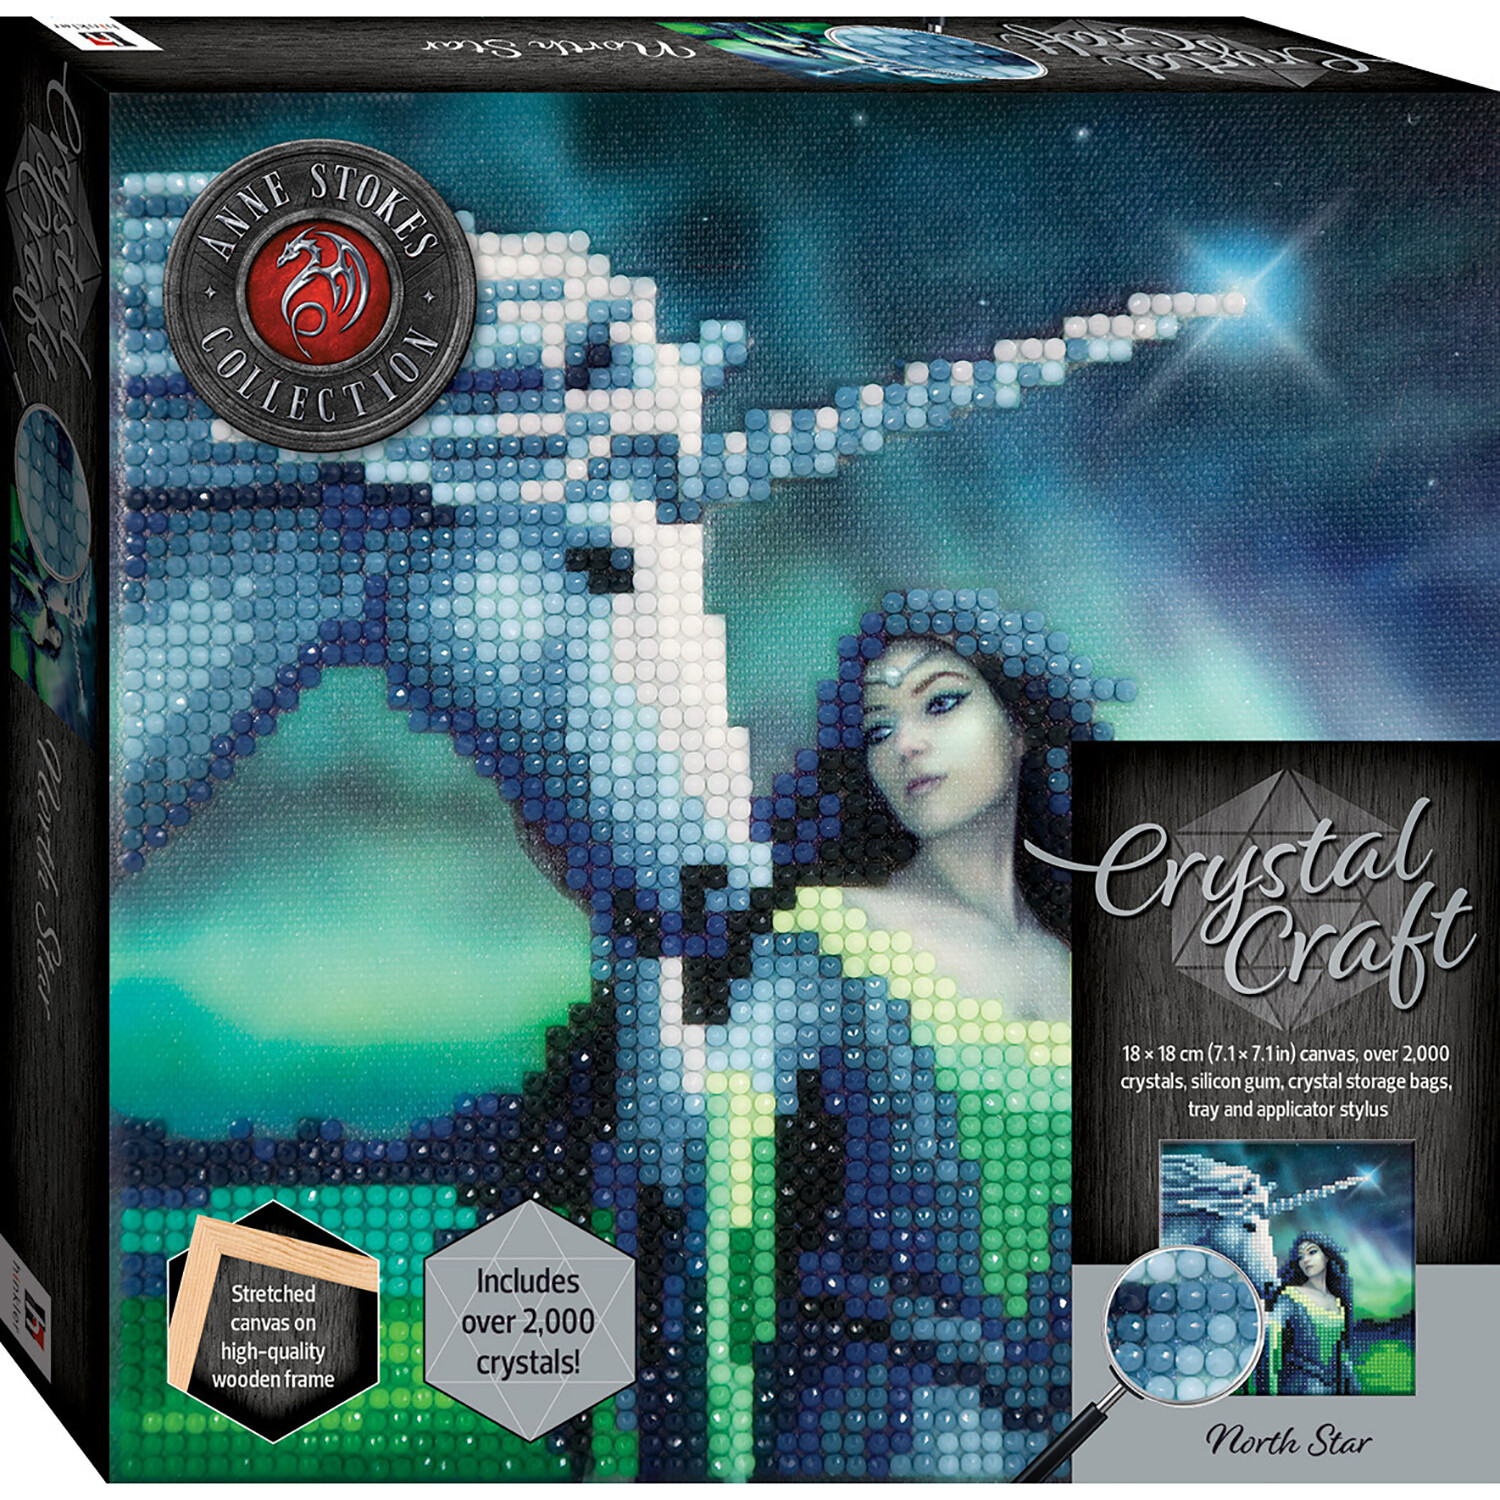 Hinkler Crystal Craft Make Your Own Woman with Unicorn Canvas Kit Image